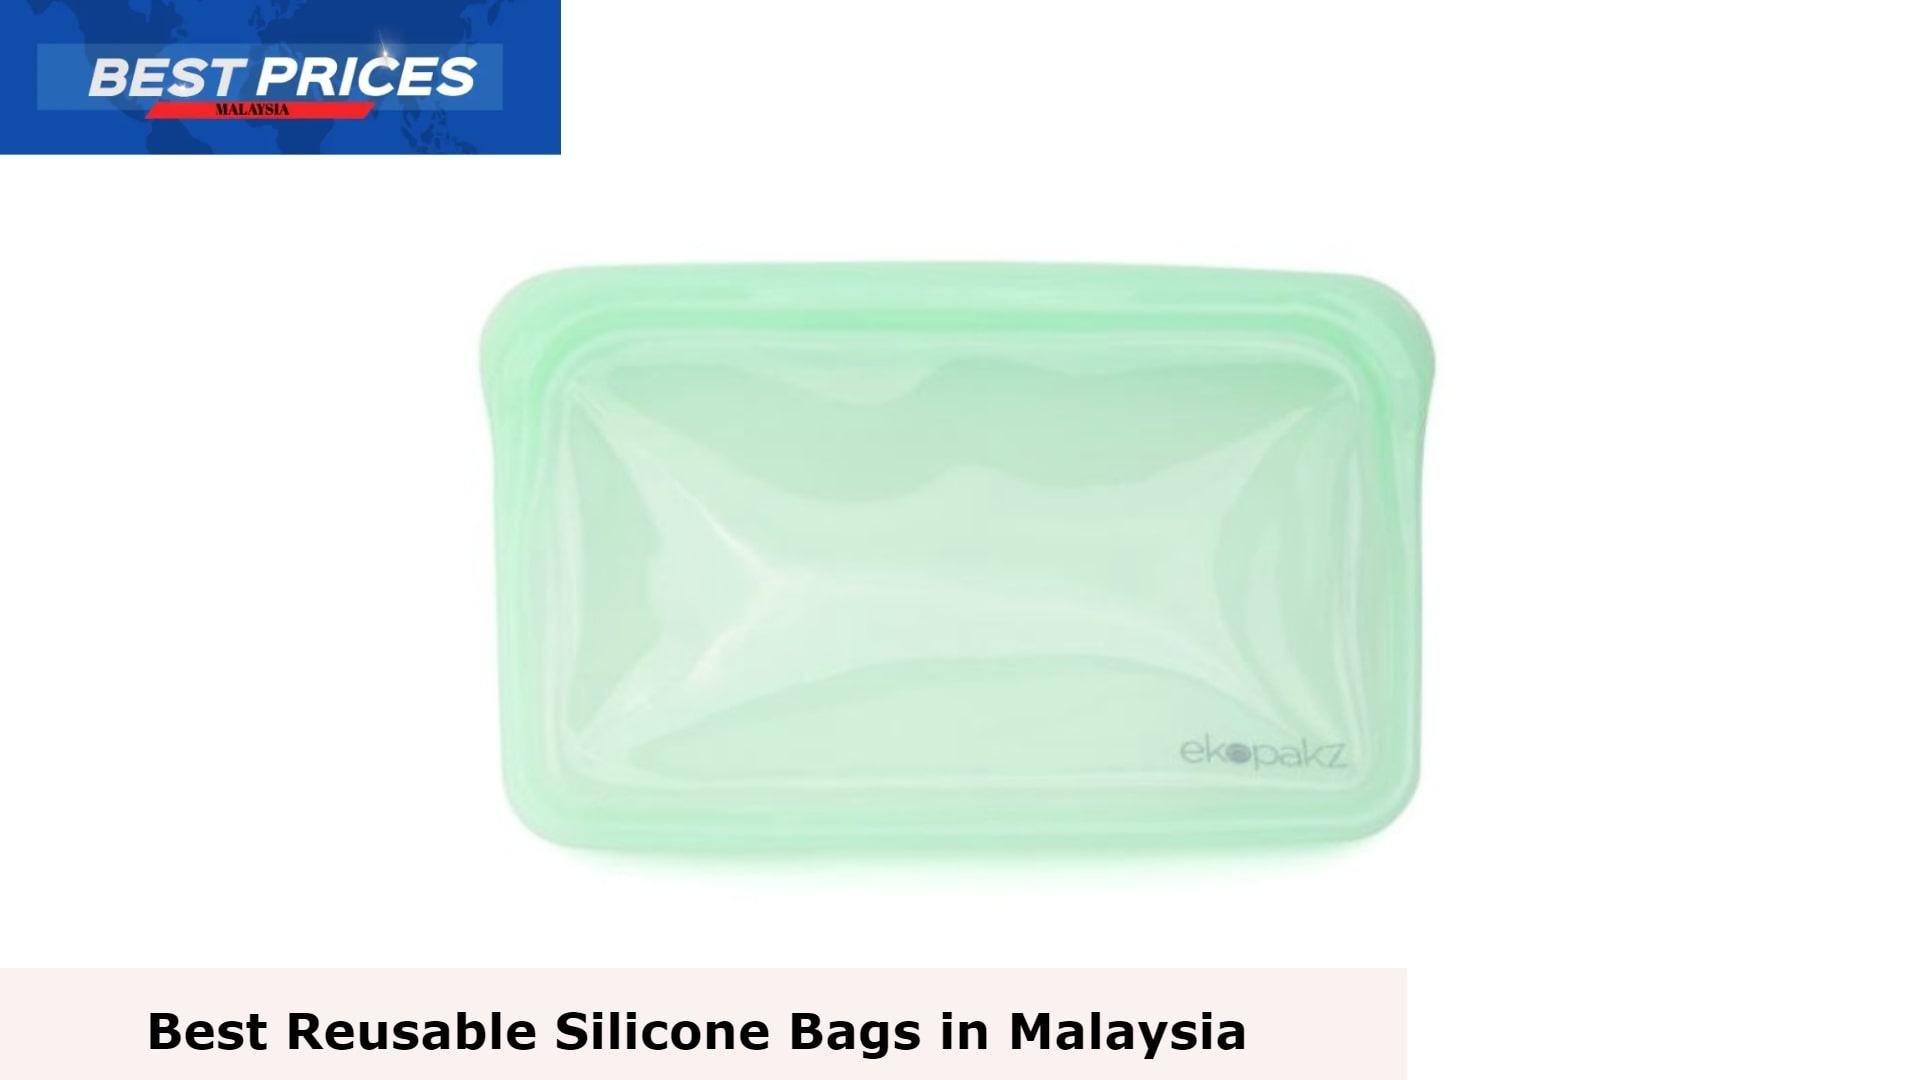 Ekopakz Reusable Silicone Bag Single 400ml - Reusable Silicone Bags Malaysia, Reusable Snack Bag, Reusable Sandwich Bag, Reusable Storage Bag, Can you reuse silicone bags?, How do you use reusable silicone bags?, Why are Stasher bags so expensive?, Are silicone bags safe?, gourmet reusable silicone bags, reusable silicone bags amazon, reusable silicone bags target, reusable silicone bags Malaysia, reusable silicone bags made in usa, how to dry reusable silicone bags, reusable silicone bags not made in china, stasher bags,